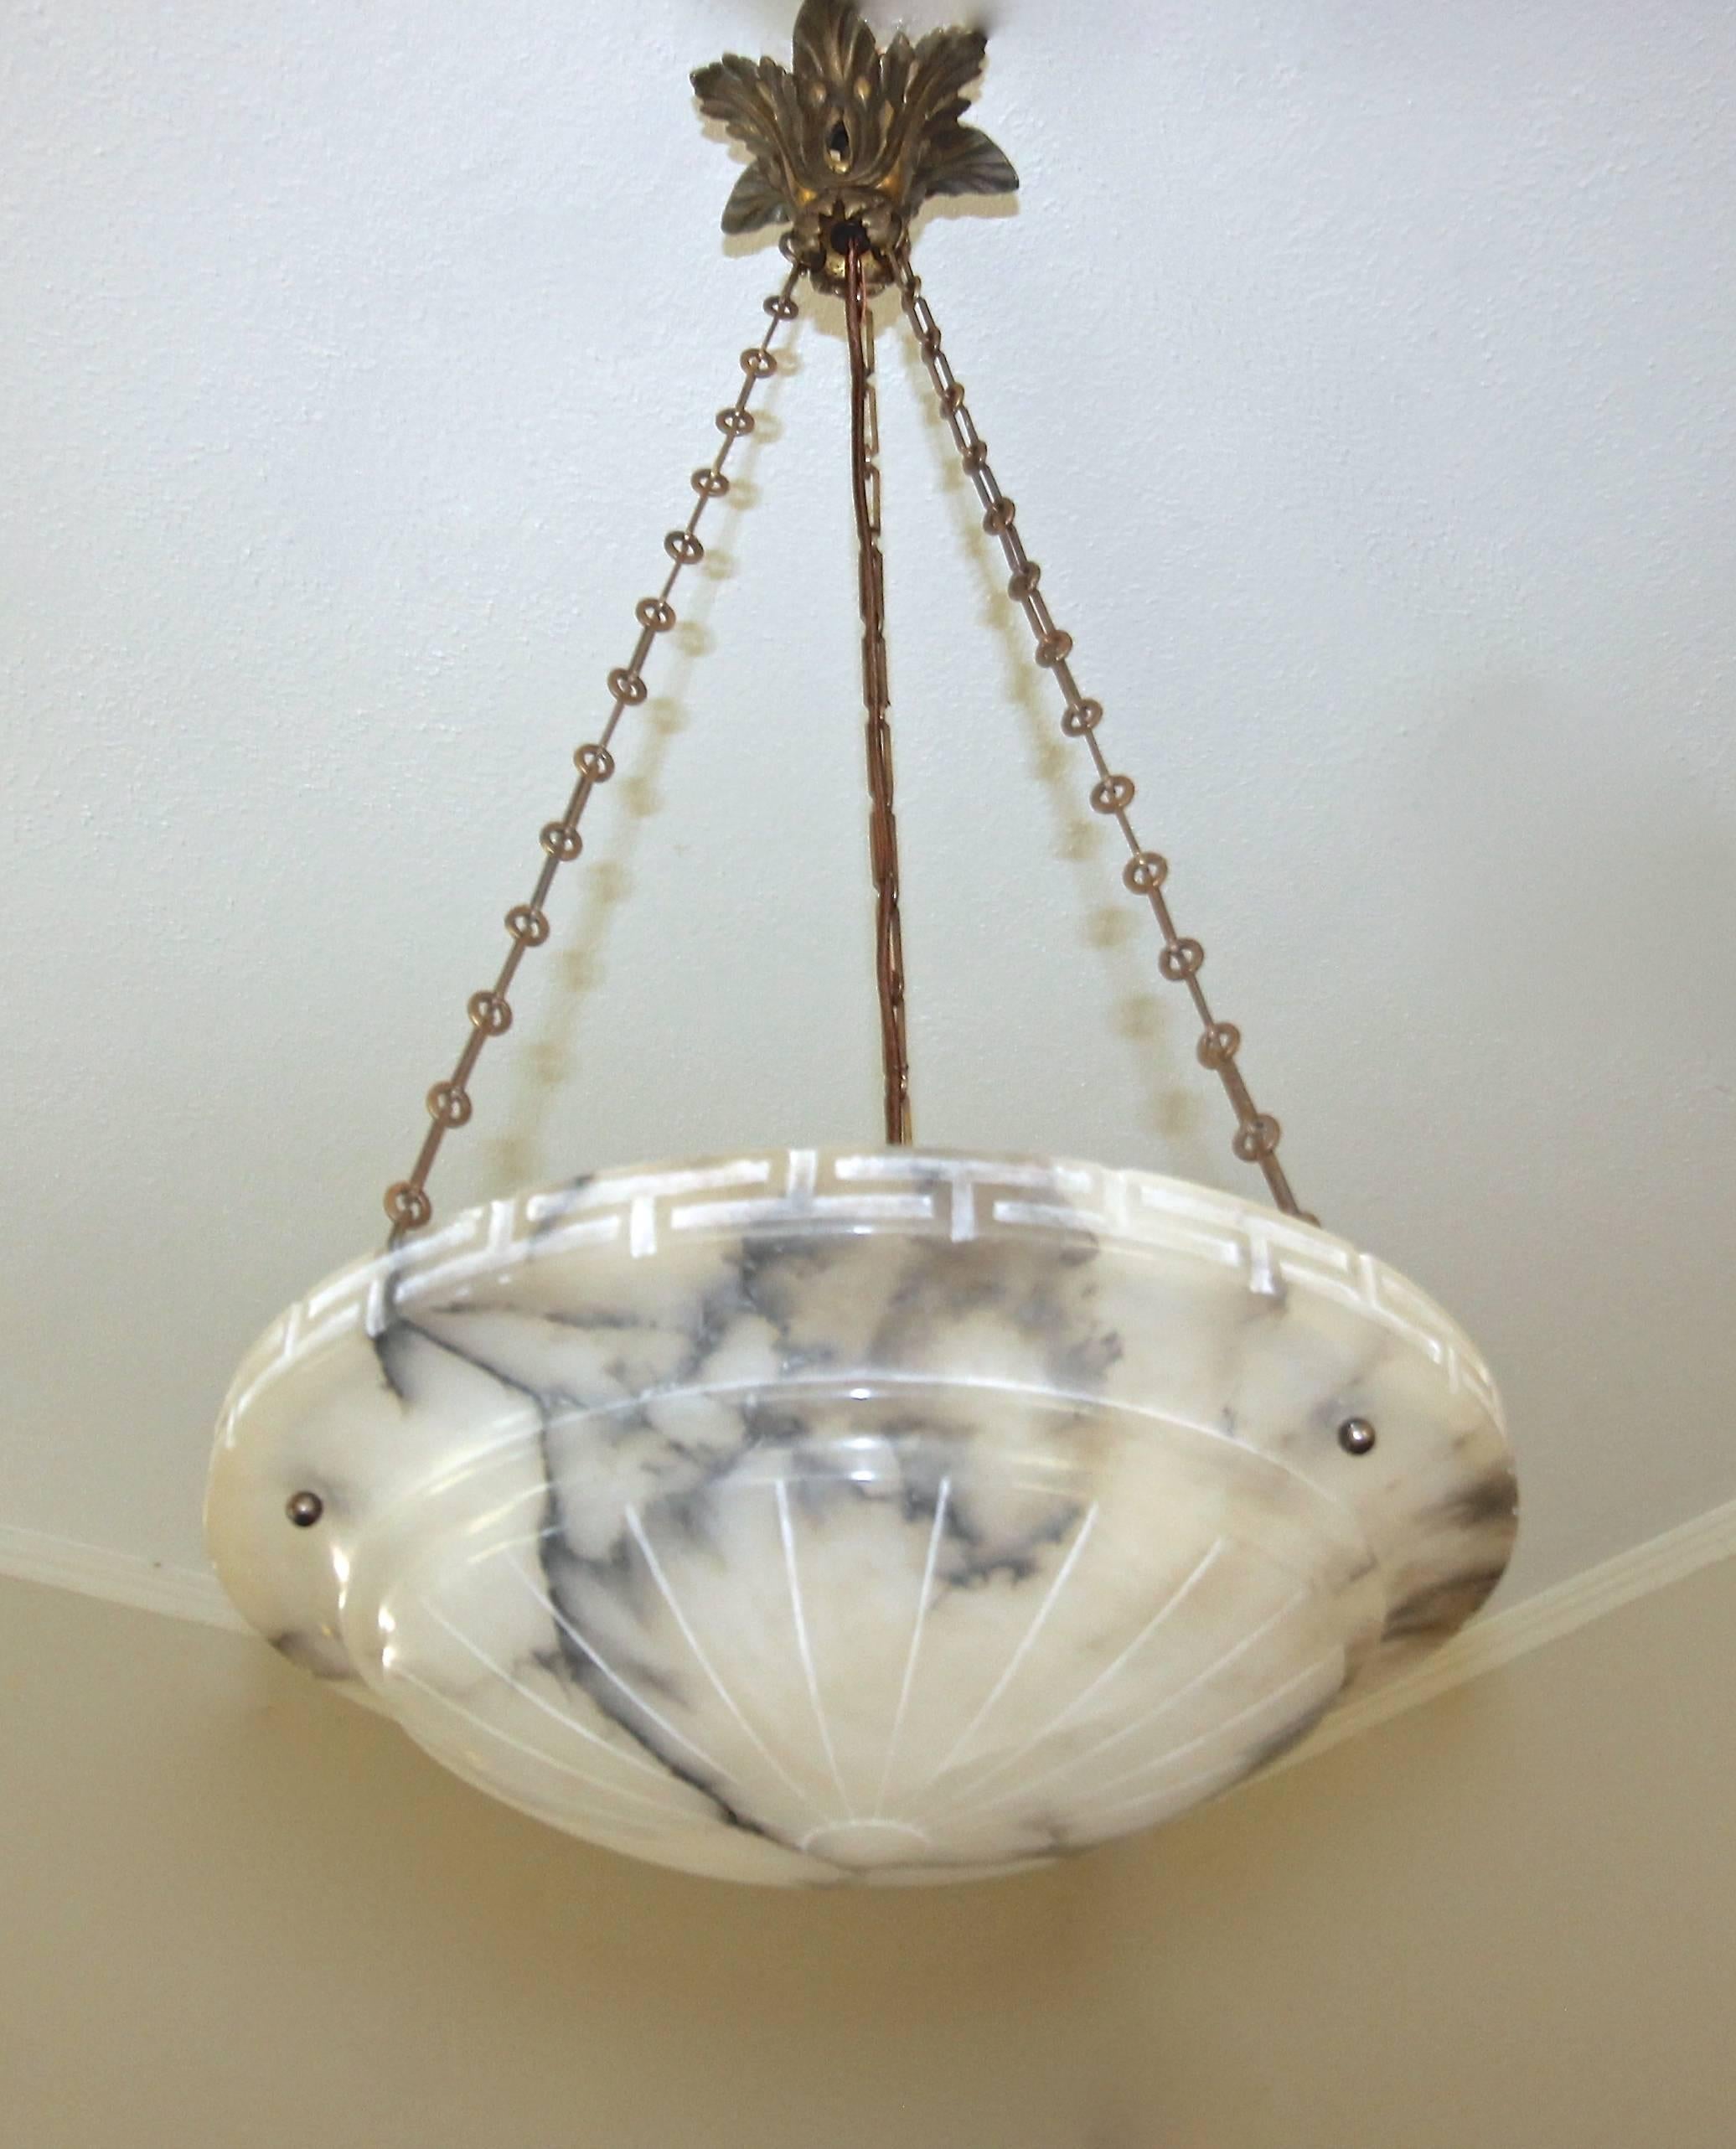 French 1920s Louis XVI style alabaster pendant light fixture with bronze fittings and hand carved white and grey veined bowl. Beautifully detailed ceiling cap with acanthus leaf detailing. Incised Greek key pattern to the outer edge of bowl and